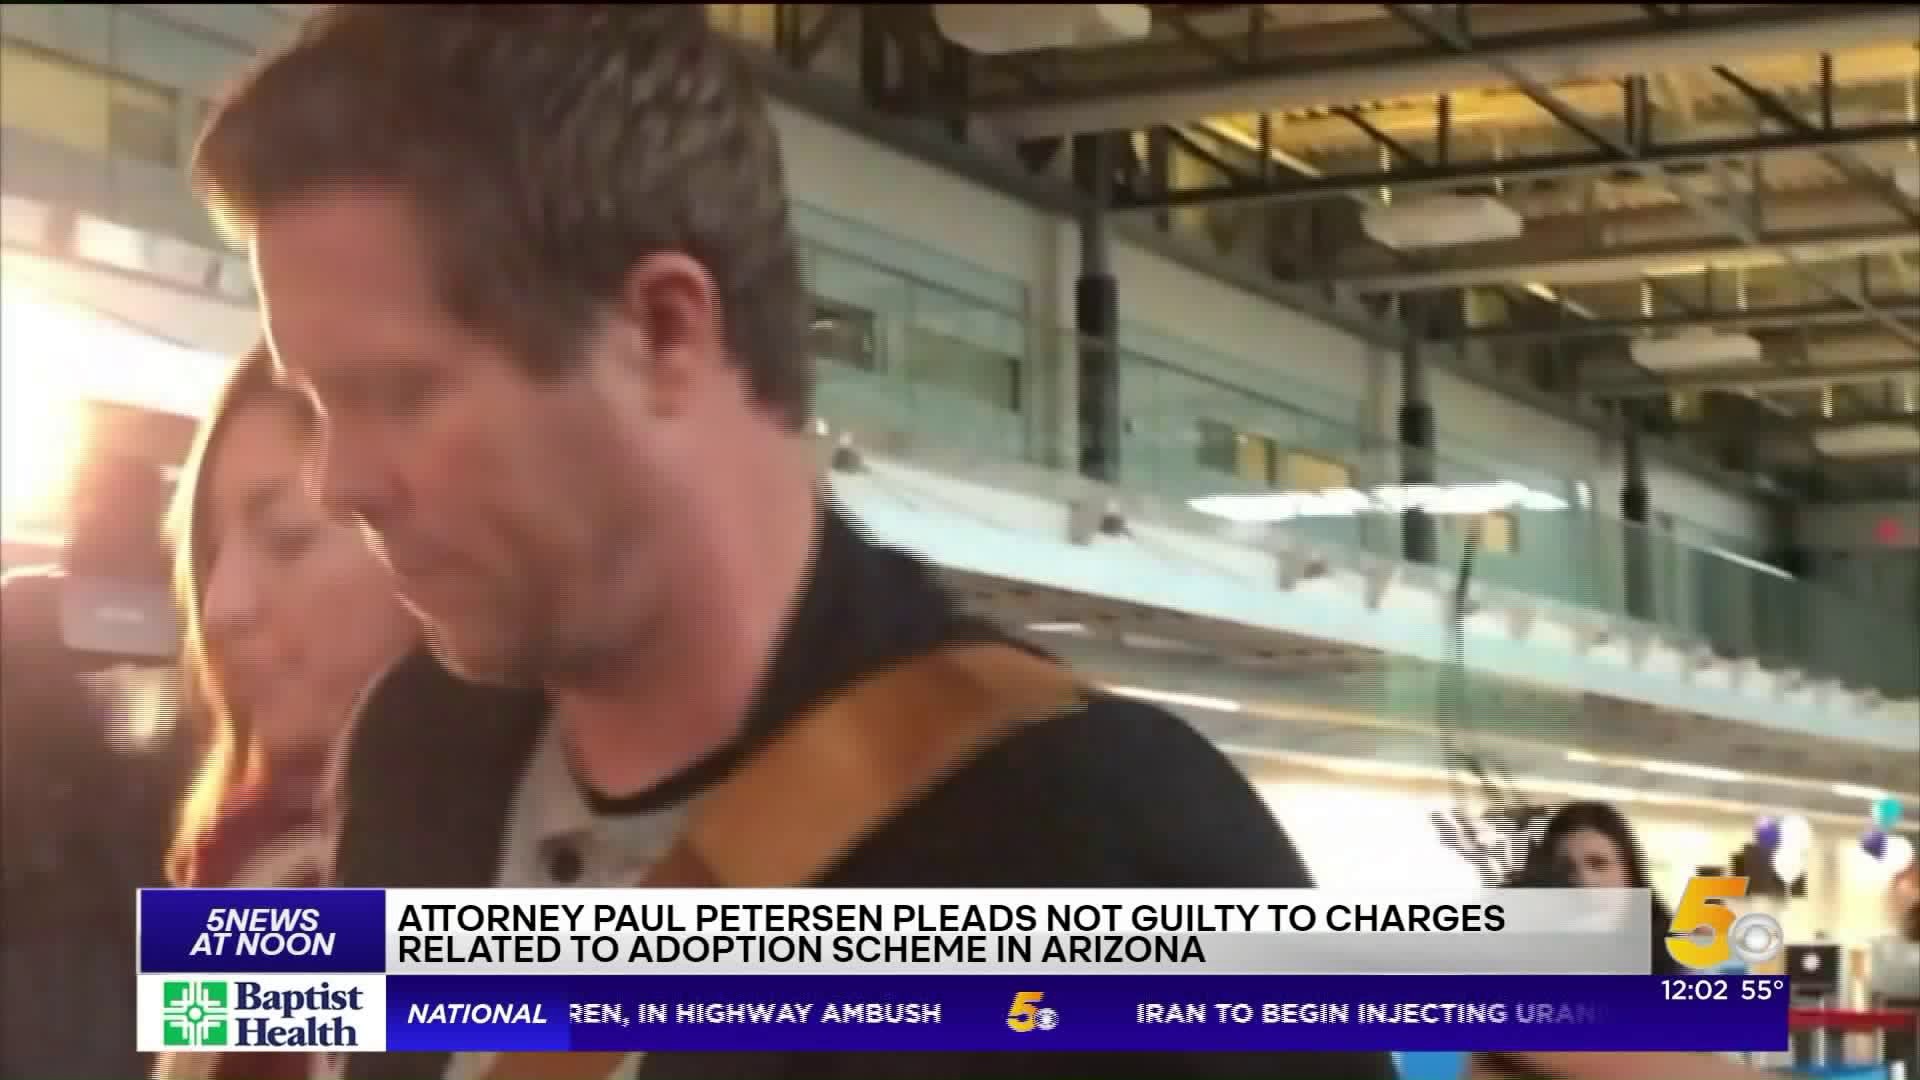 Paul Petersen Pleads Not Guilty To Charges In Arizona For Alleged Baby Adoption Scheme